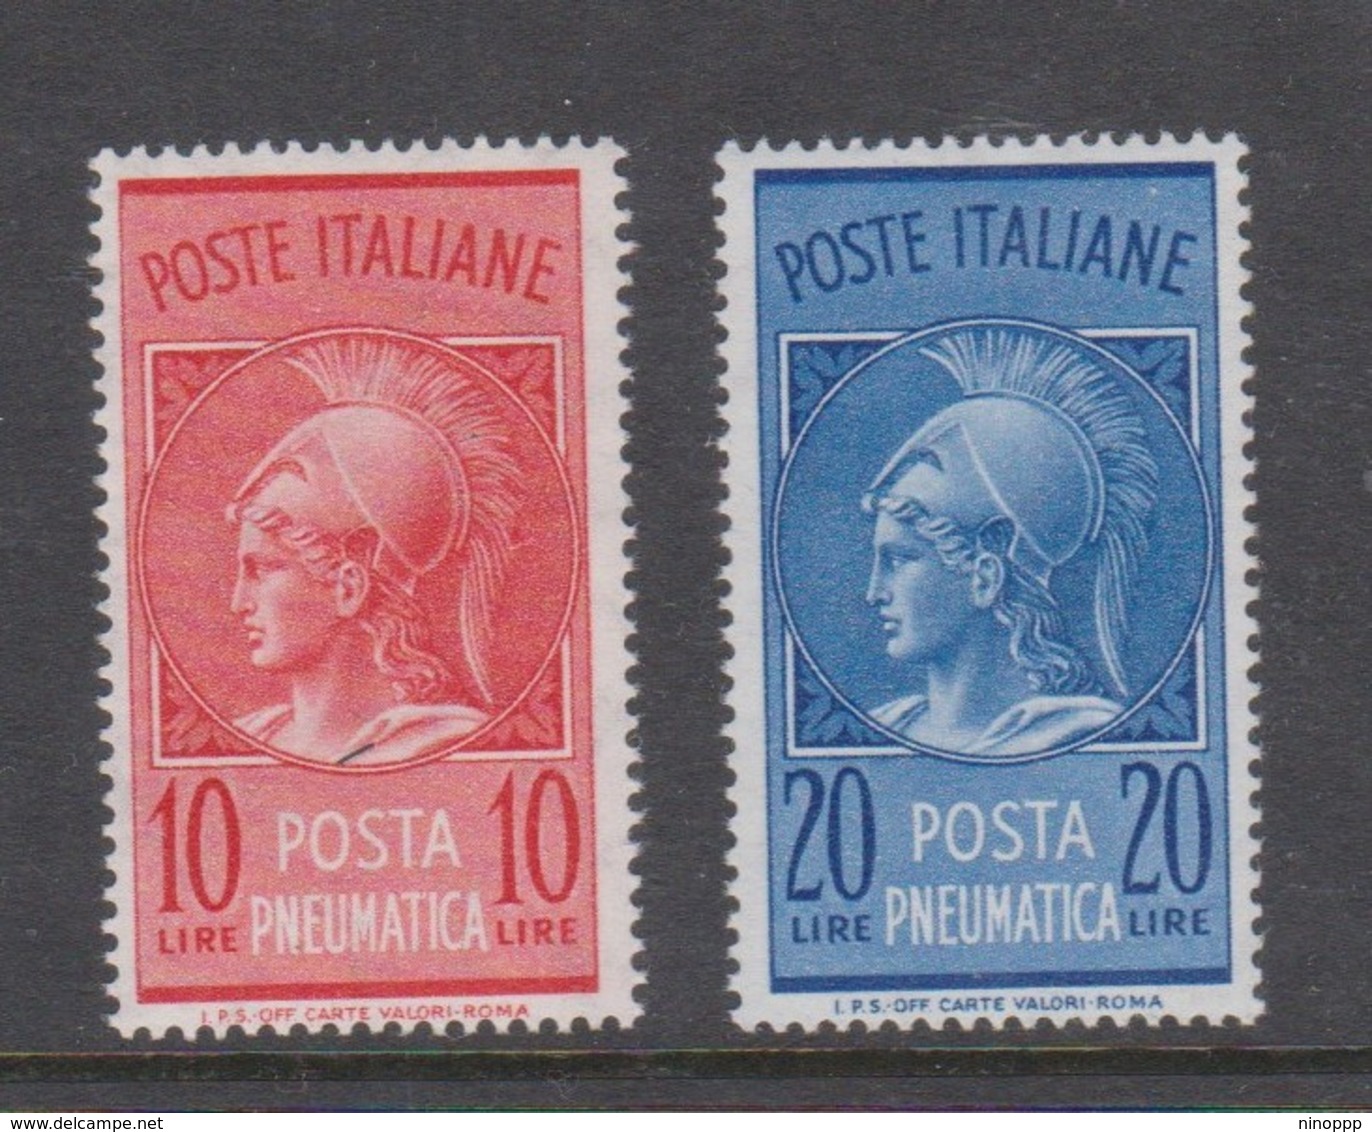 Italy PNP 20-21 1958 Pneumatic Post 10 Lire Red ,mint Never  Hinged - Express/pneumatic Mail